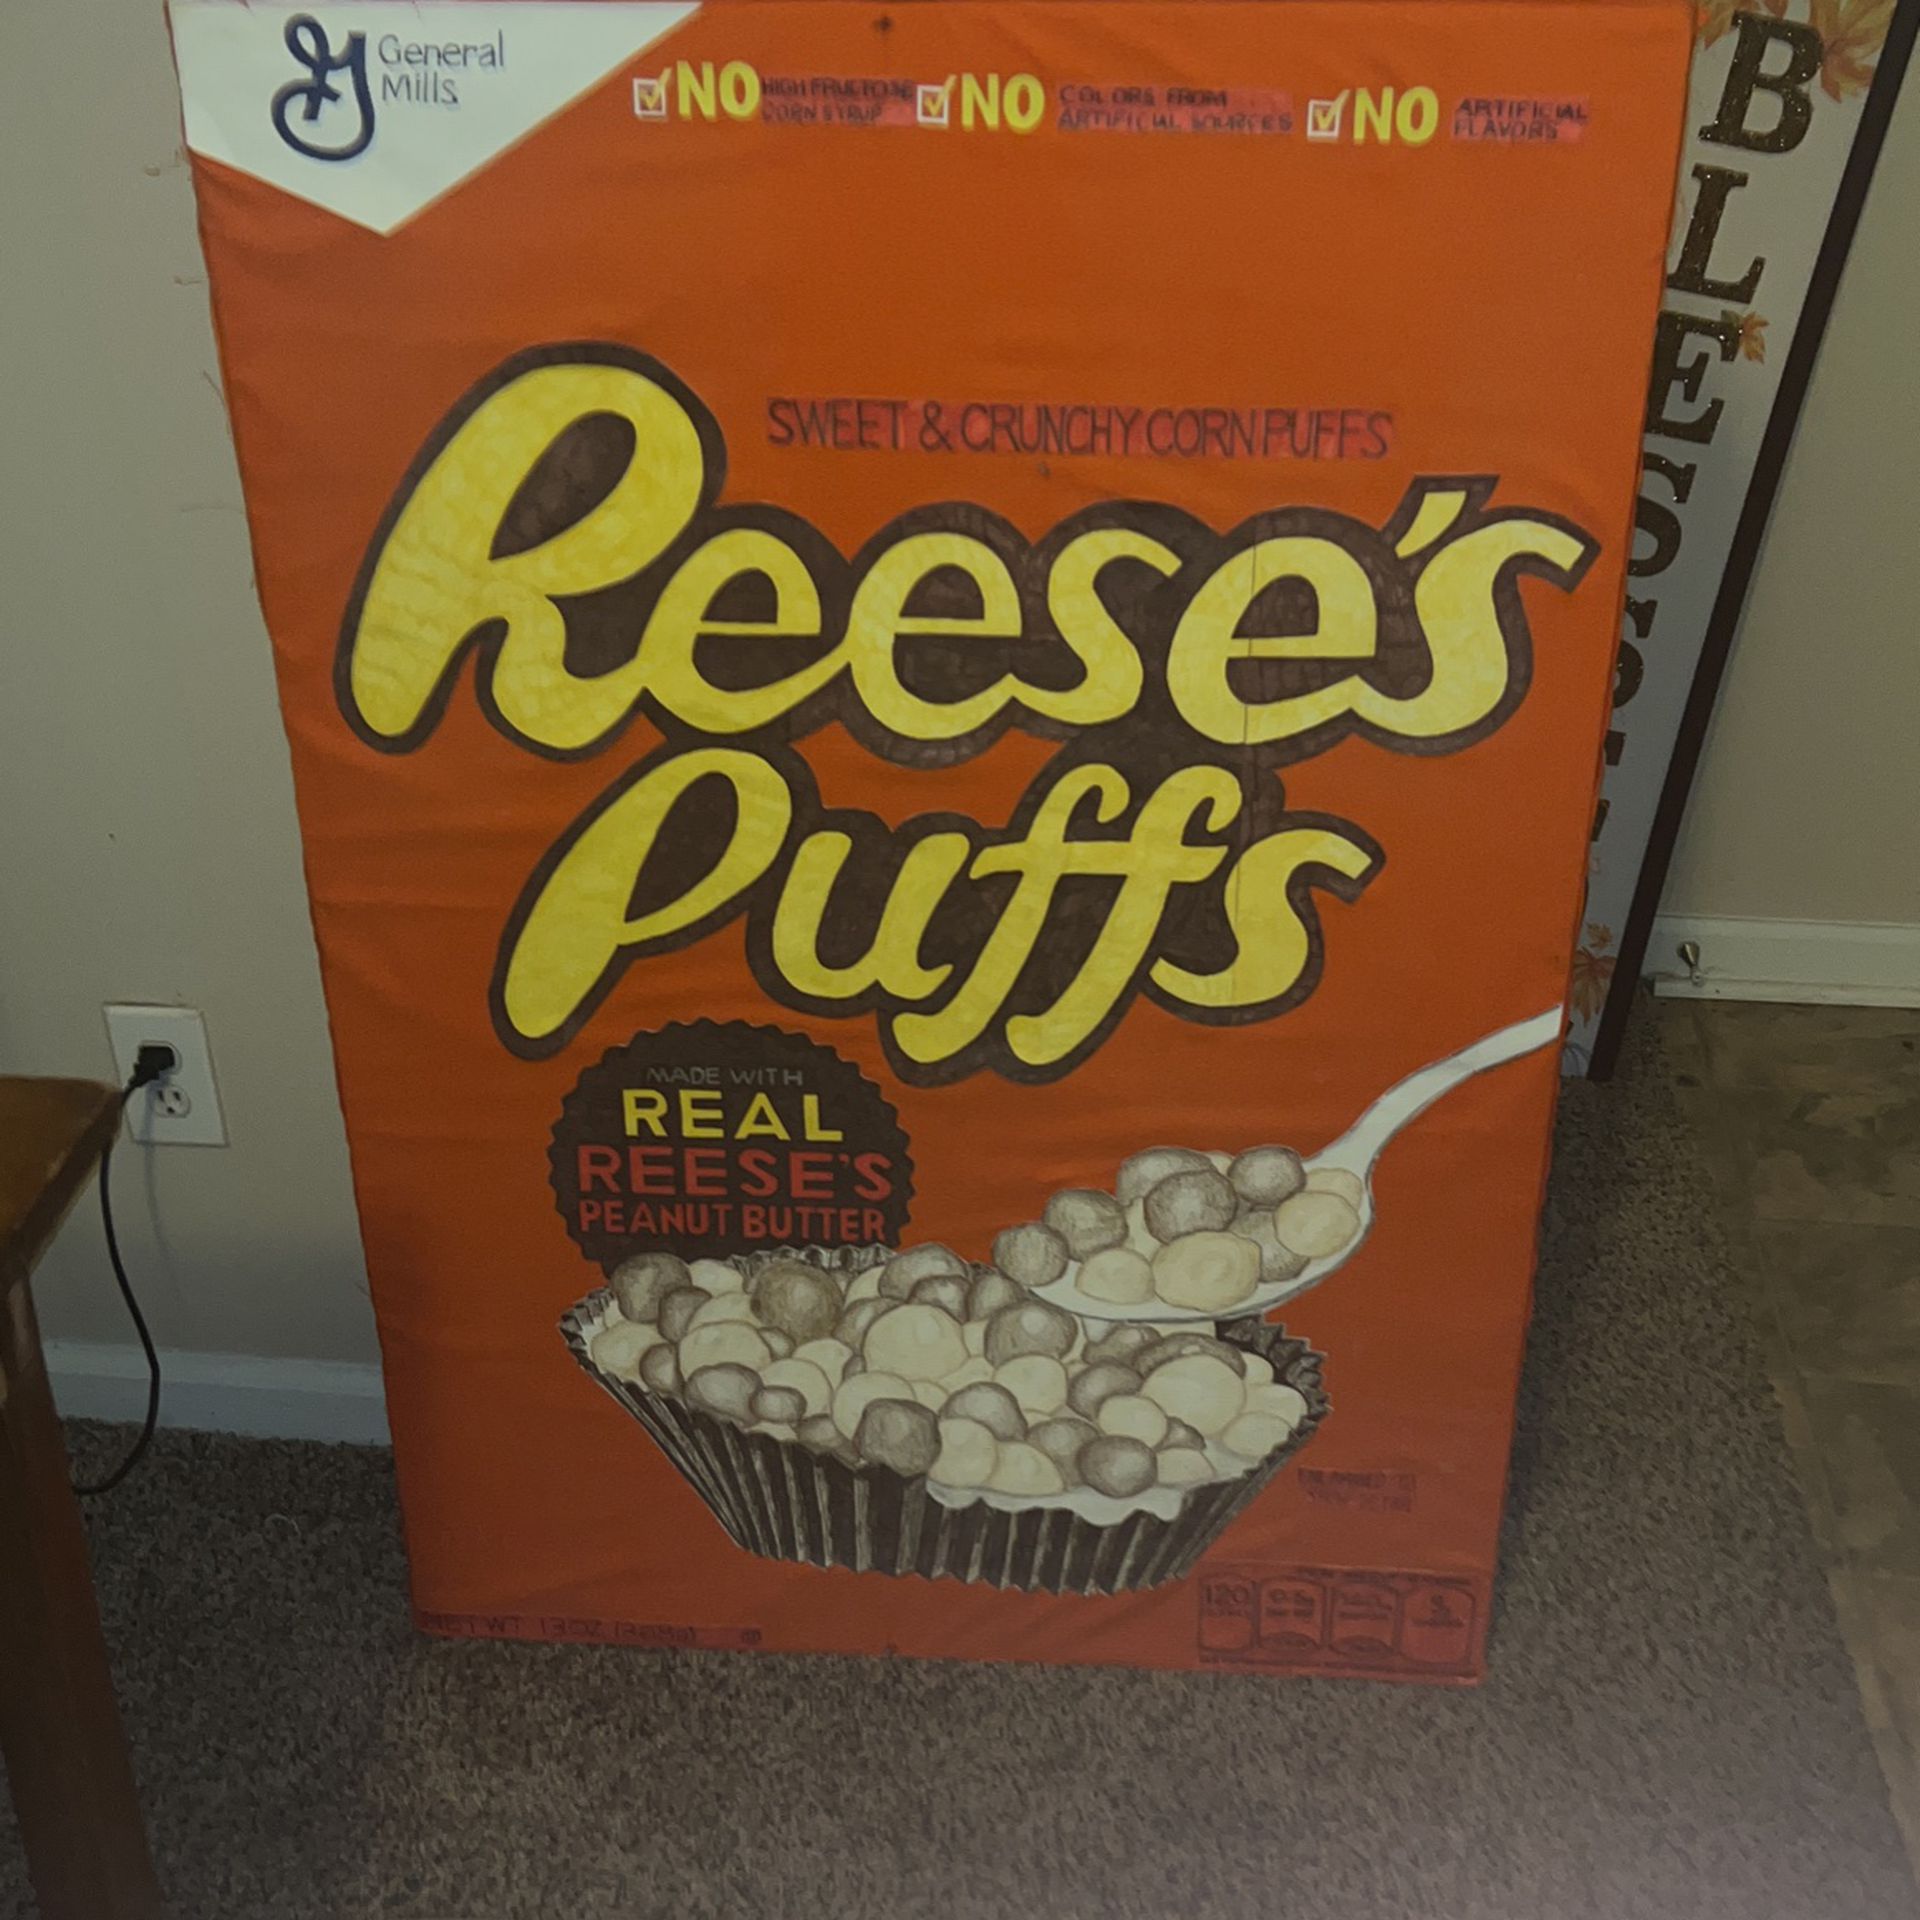 Giant Reese’s Puffs Cereal Box